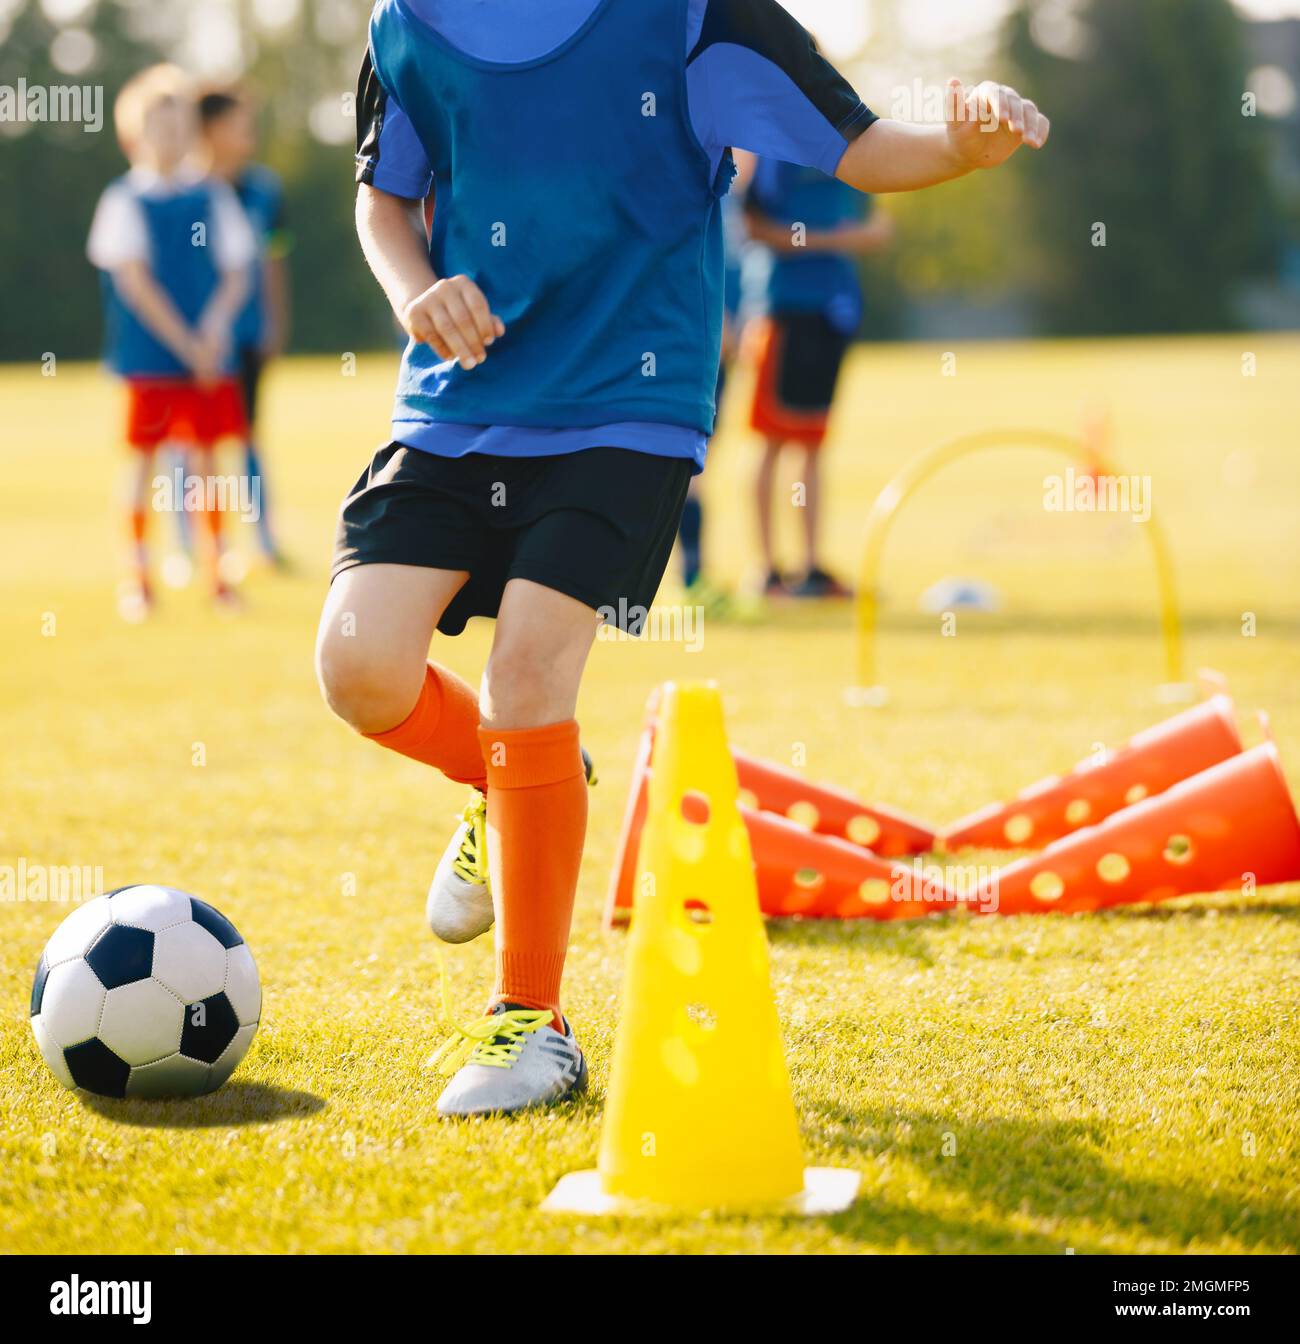 Boy Soccer Player In Training Drill. Young Soccer Players at Practice Session Stock Photo